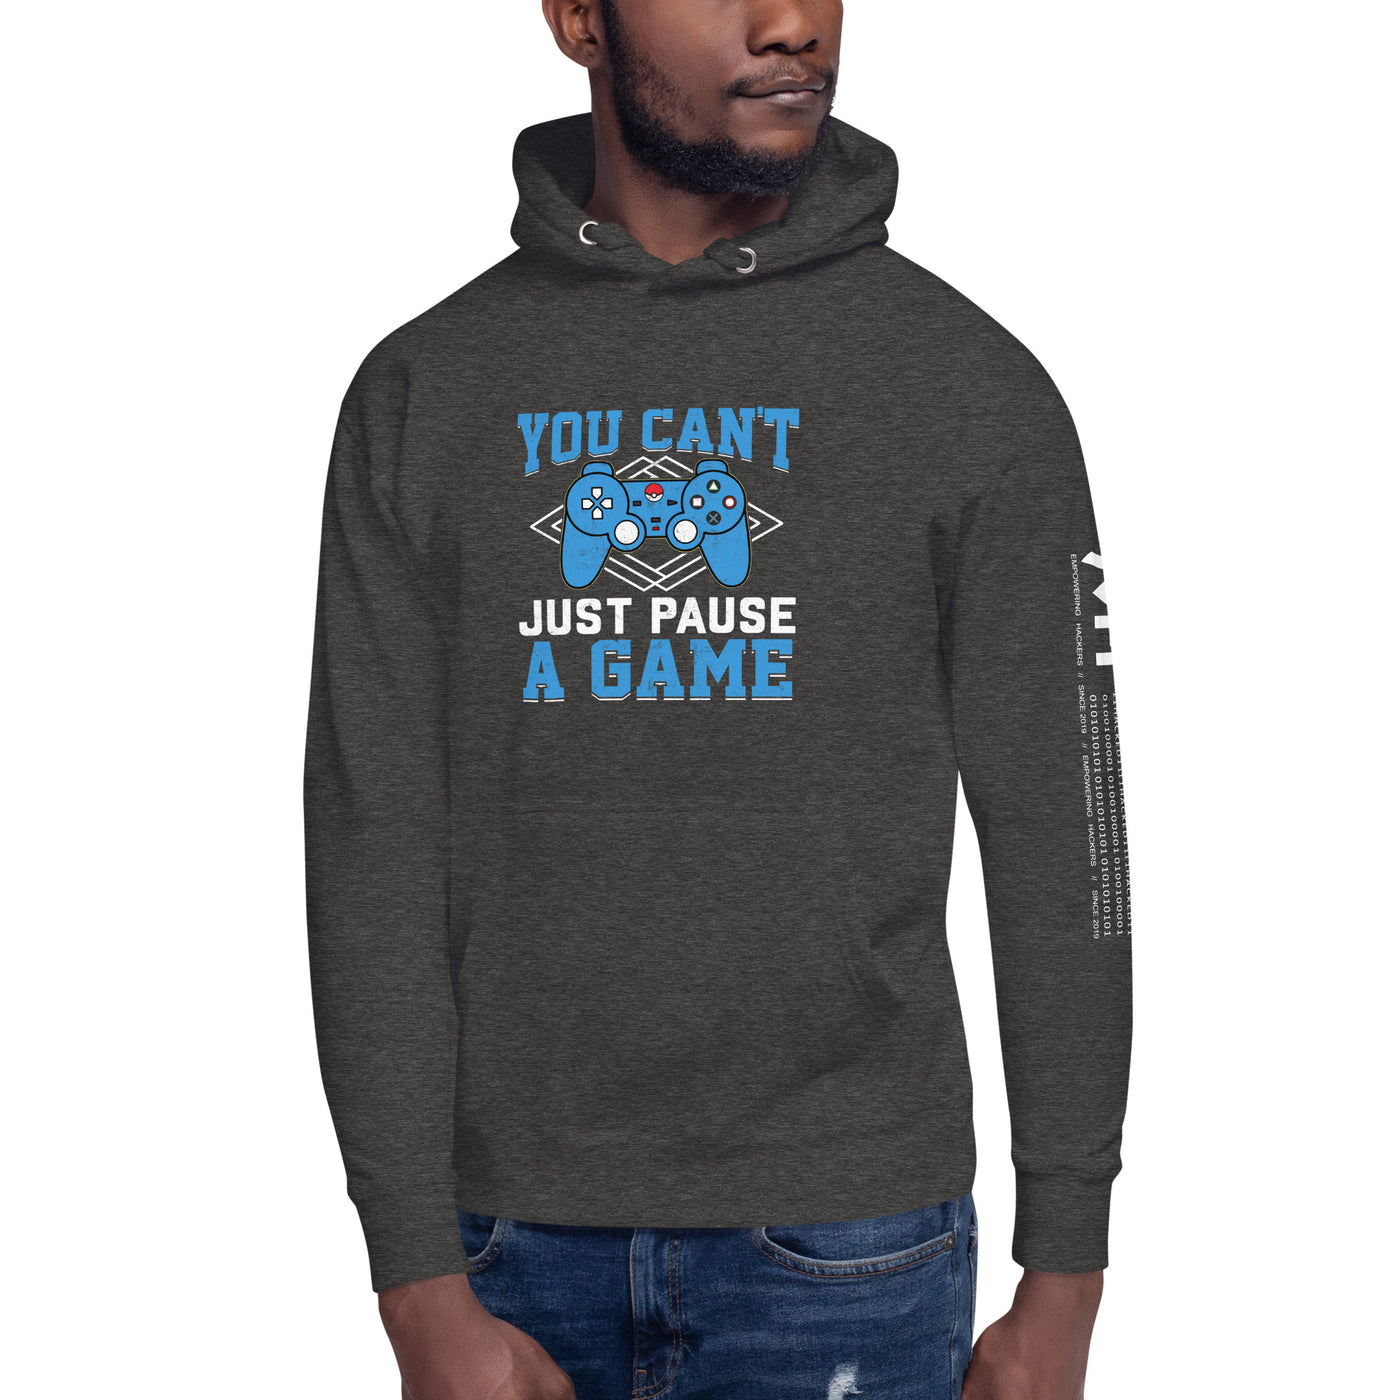 You can't just Pause a Game - Unisex Hoodie